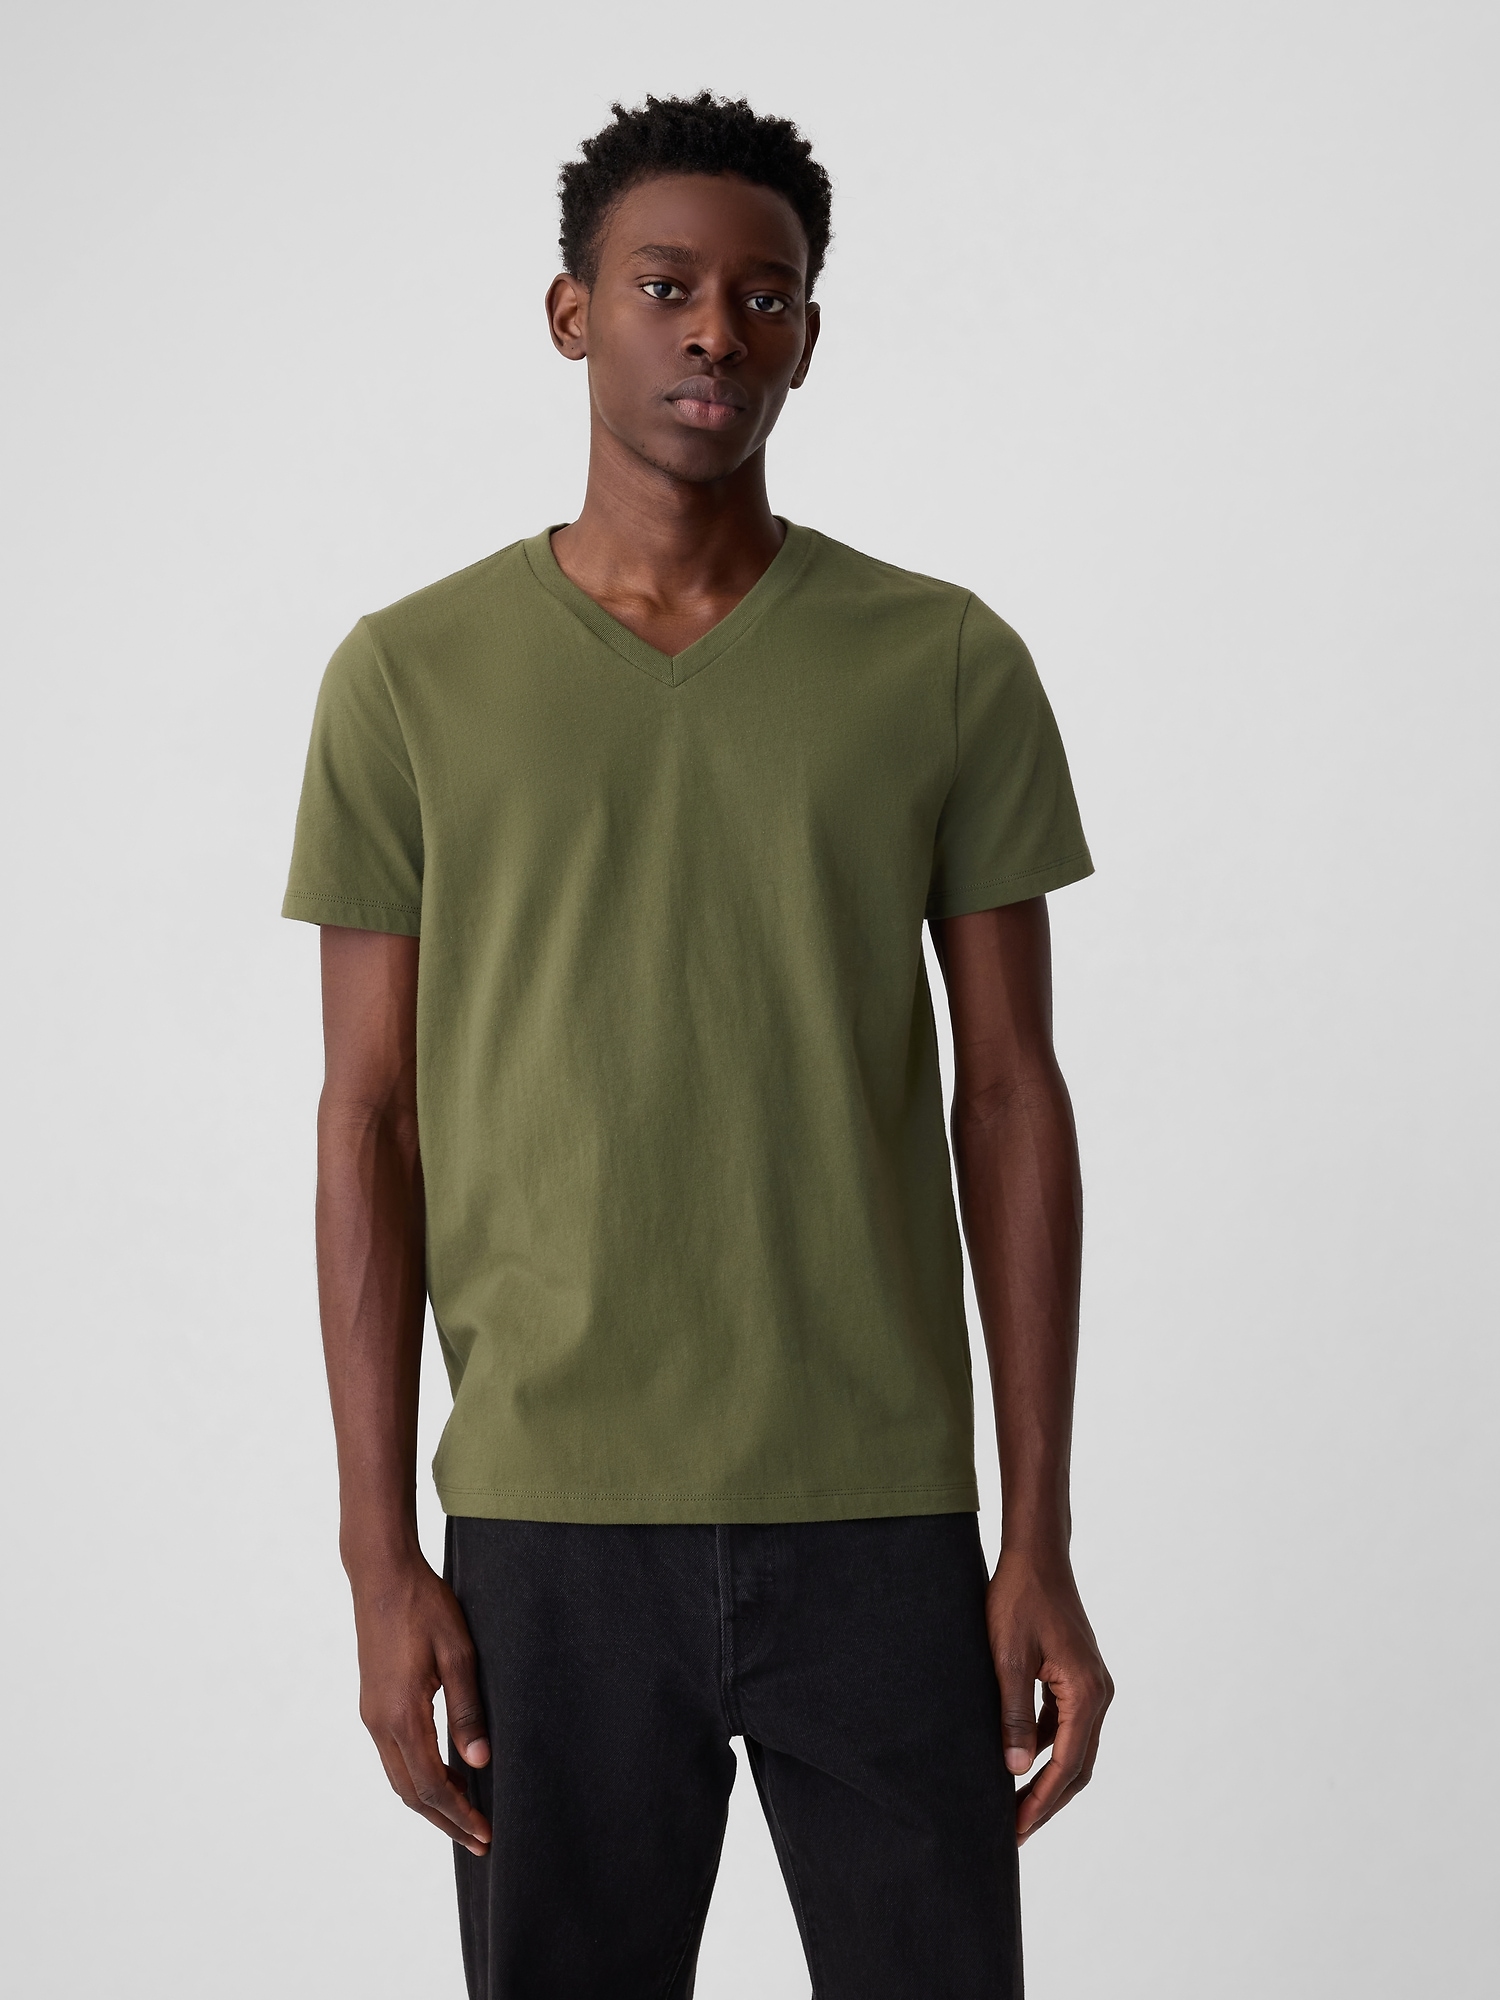 Gap Cotton Classic V T-shirt In Army Jacket Green